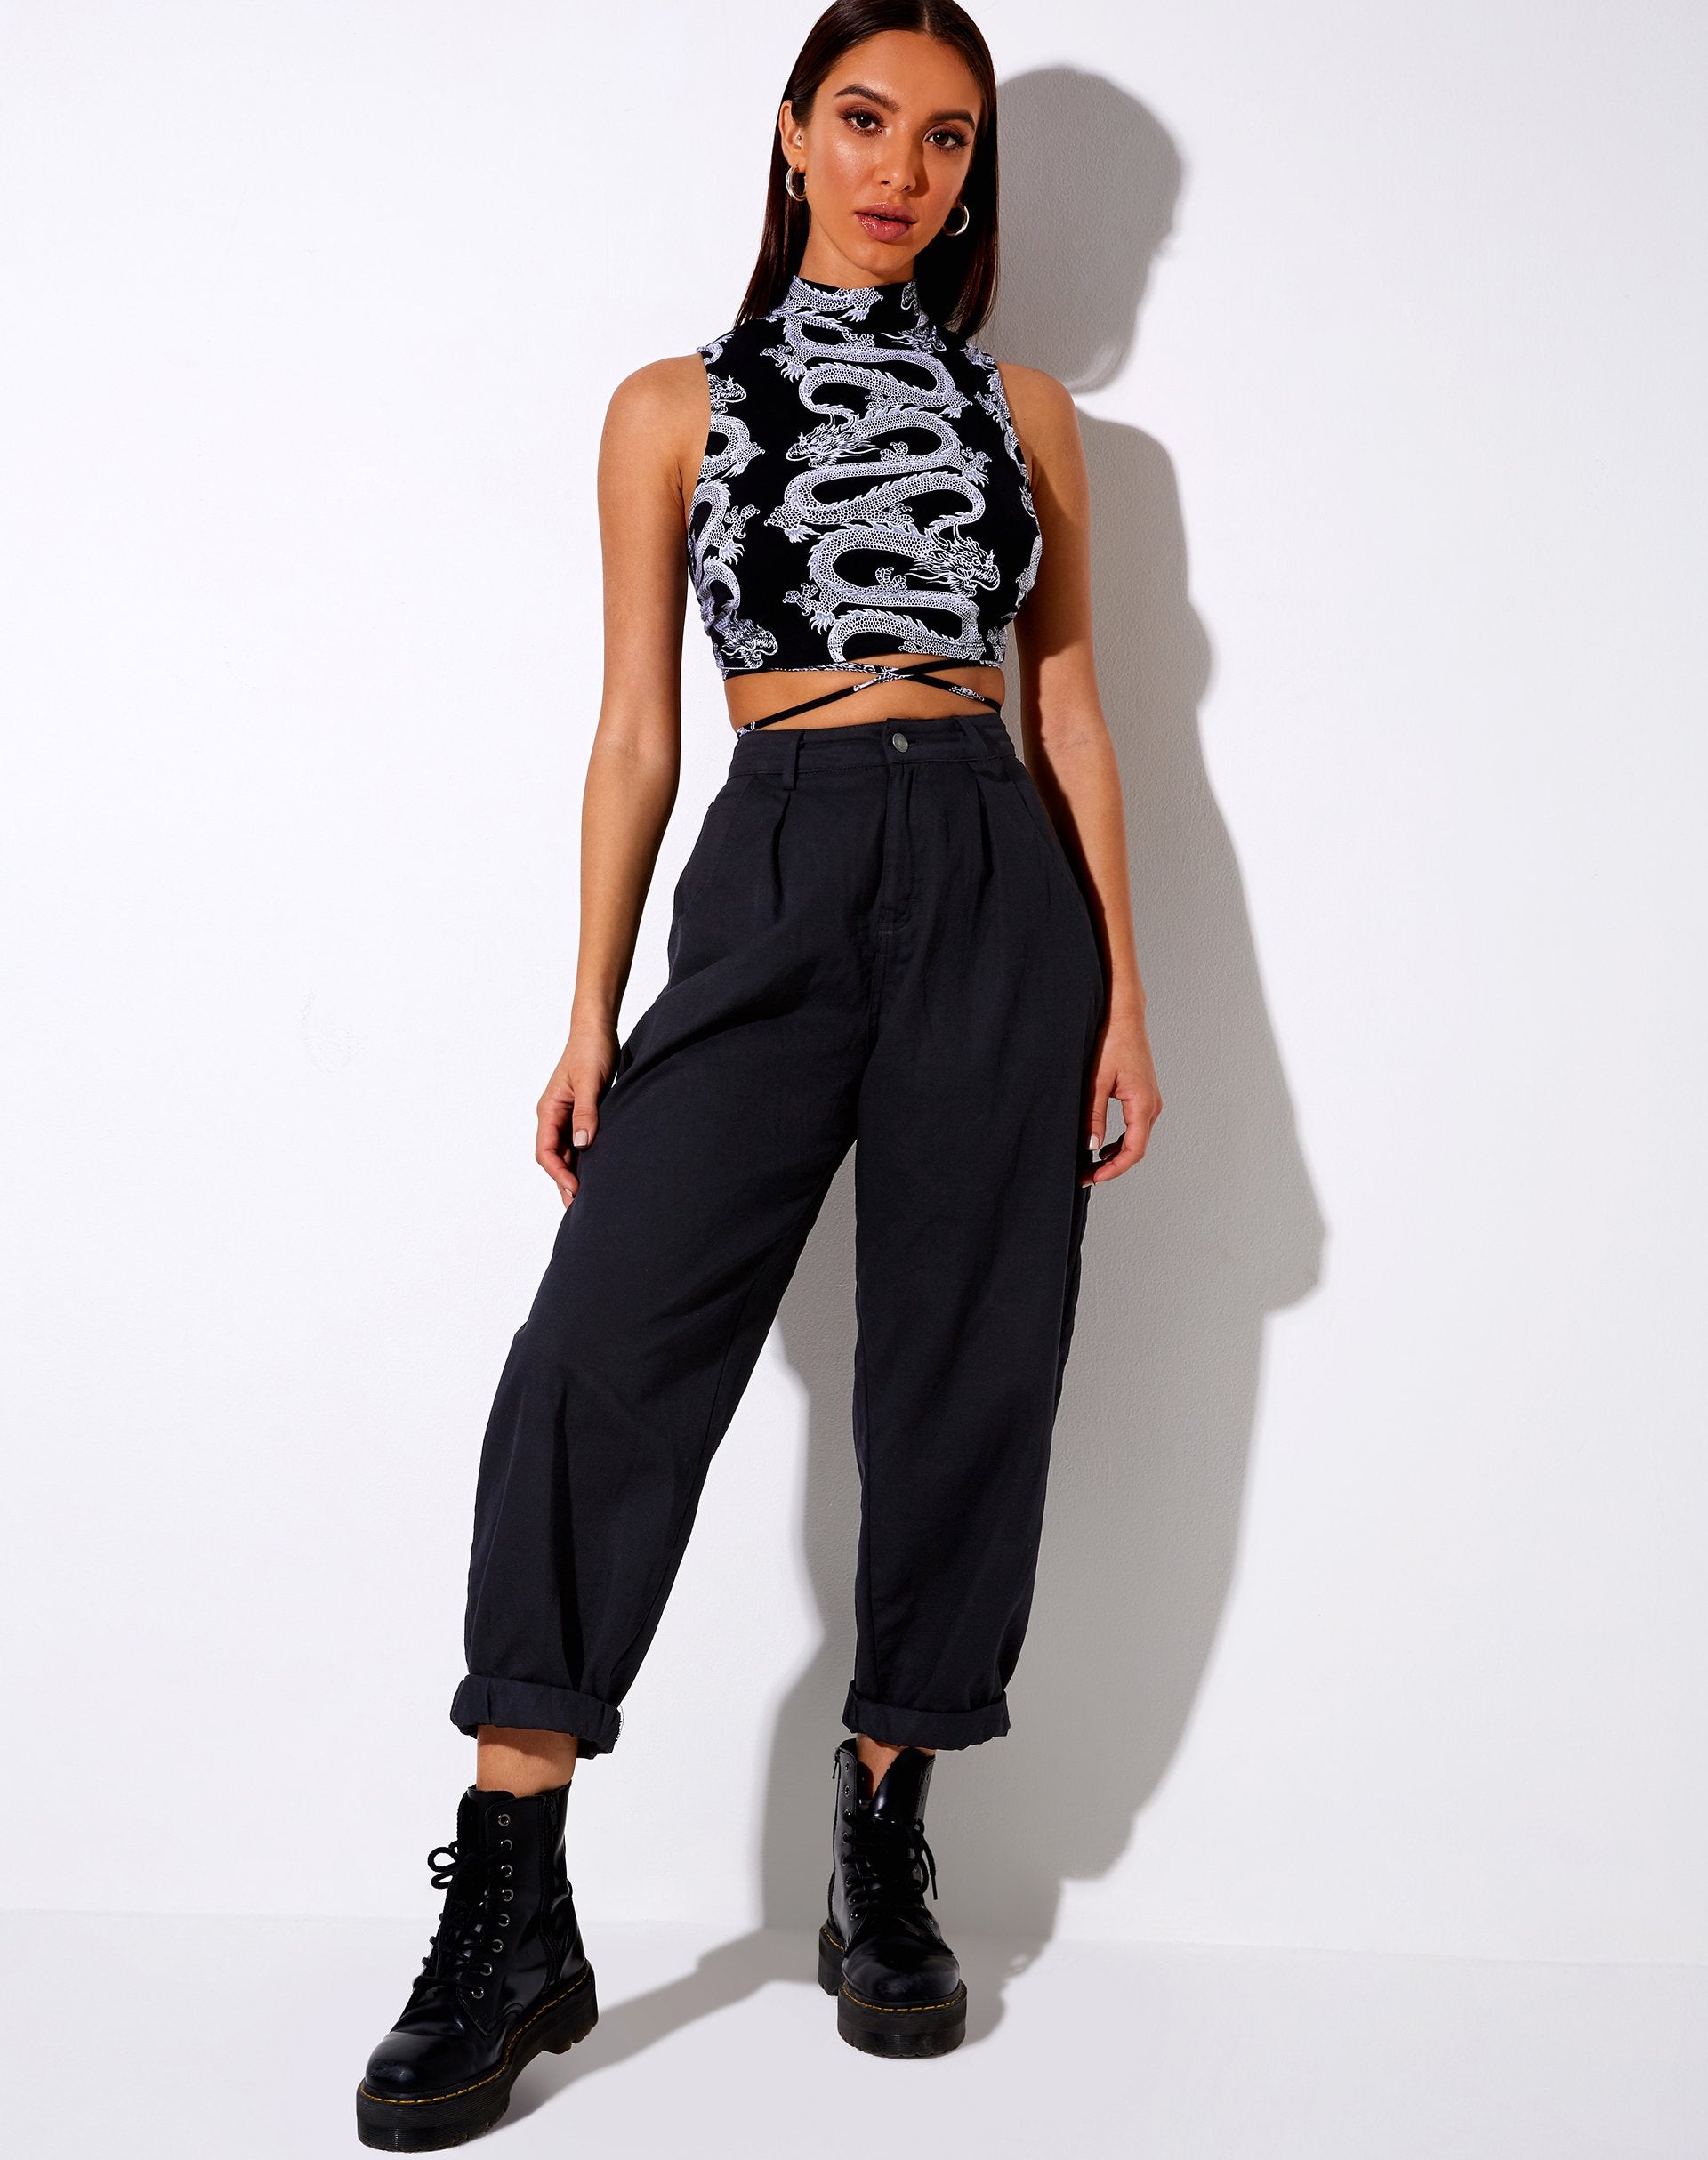 Image of Quera Crop Top in Dragon Rope Black Placement